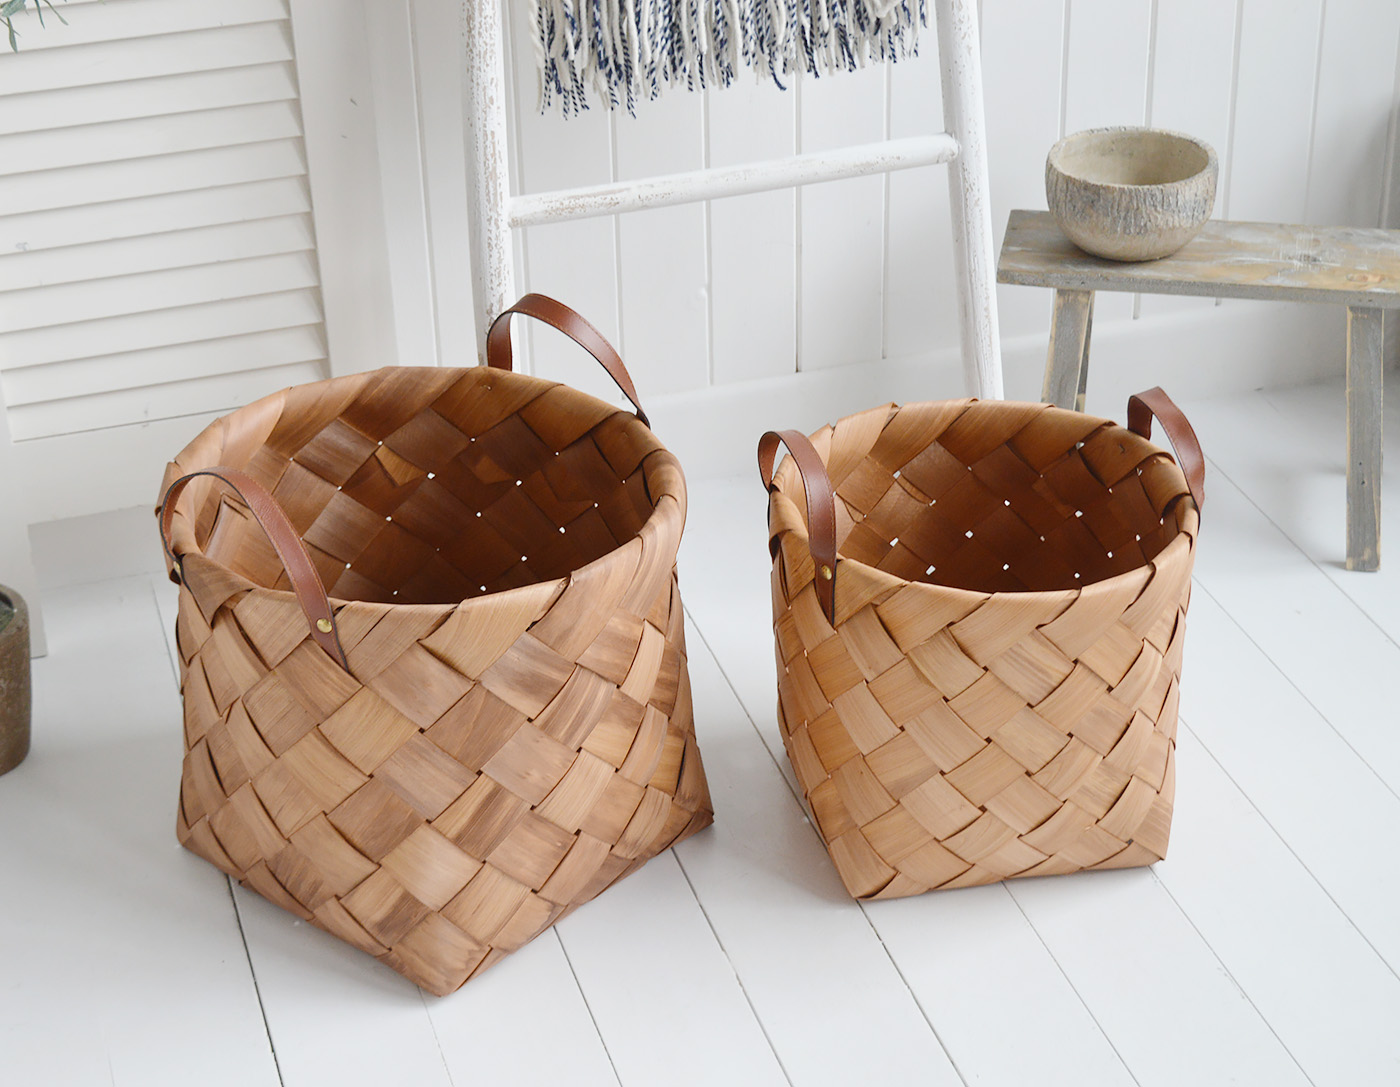 White Furniture and accessories for the home. Set of Branford large hand woven baskets with handles. Log and storage for New England style homes in country, coastal and city 